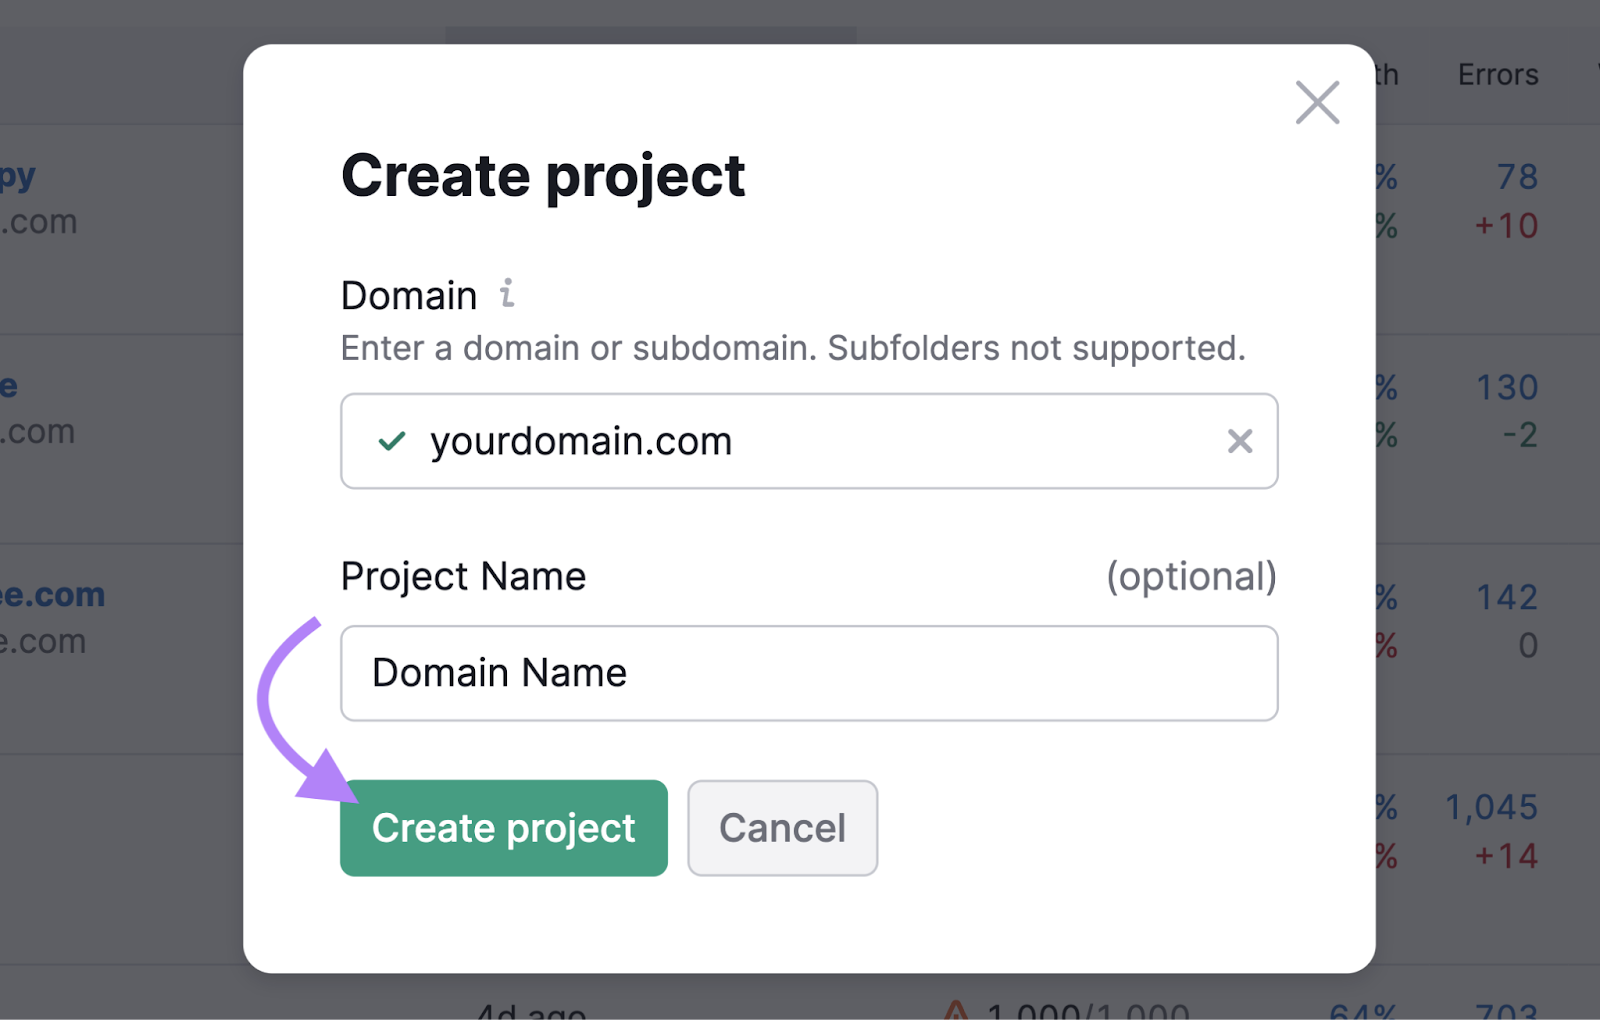 domain entered into project field